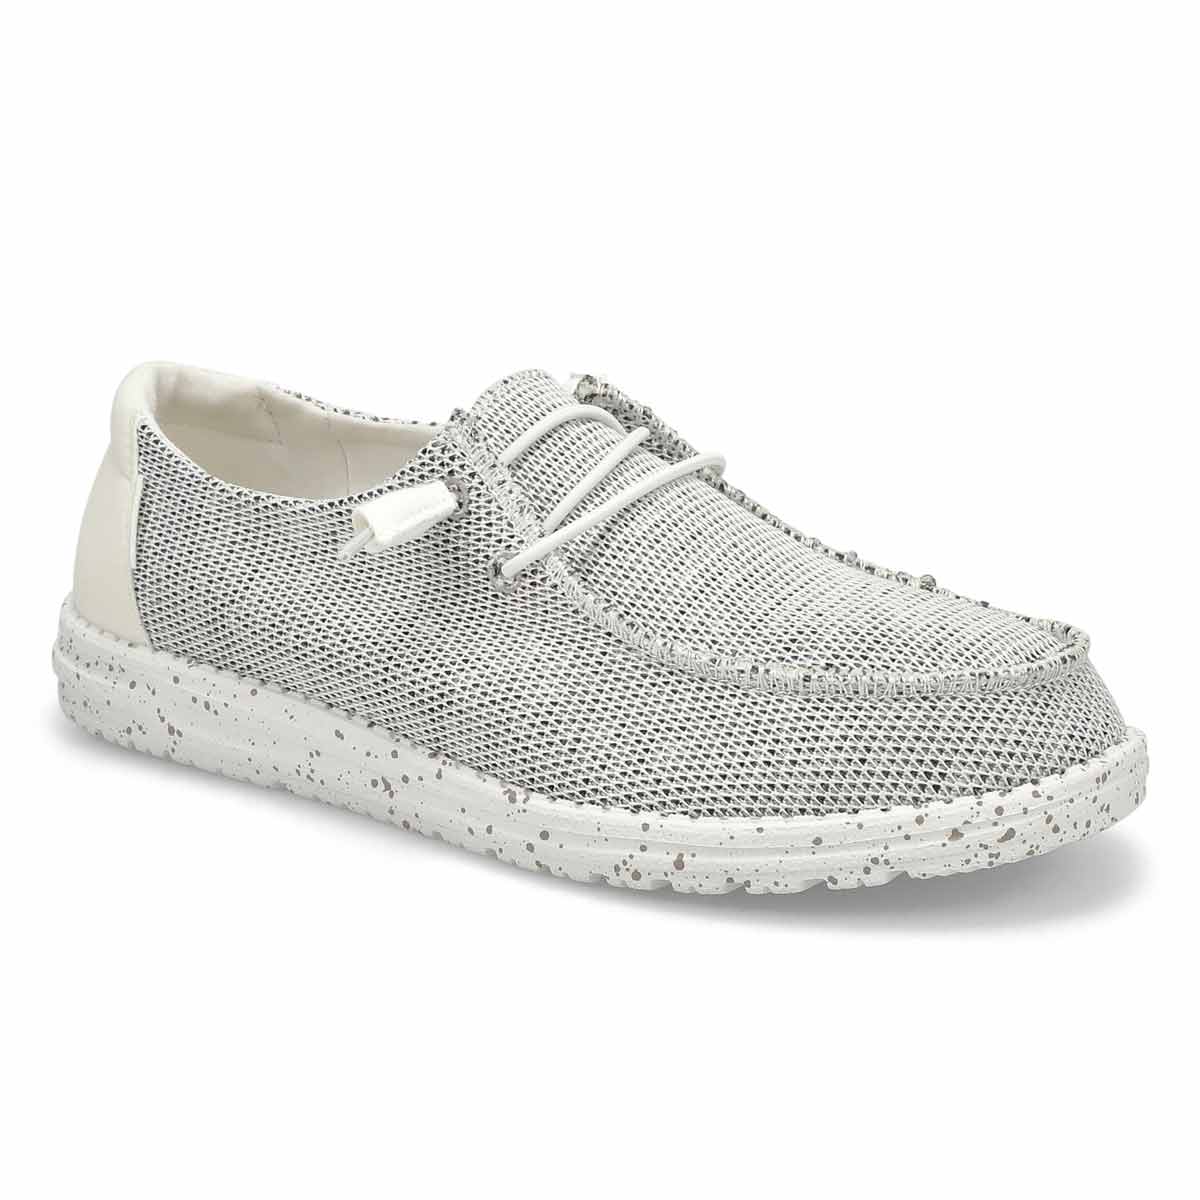 Hey Dude Wendy Washed Canvas Slip-On Casual Shoes (Cream) Women's